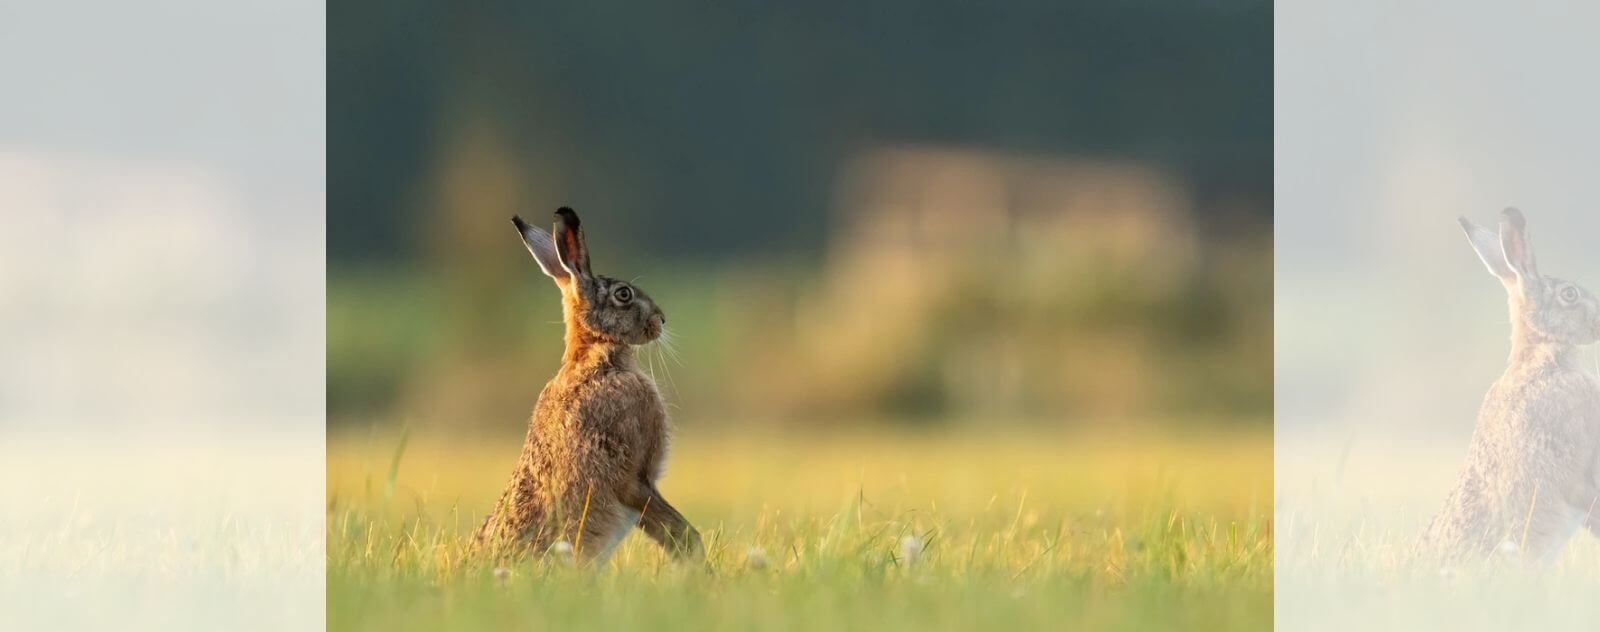 Hare Standing on Its Legs Above the Tall Yellow Grass (Lagomorphe)